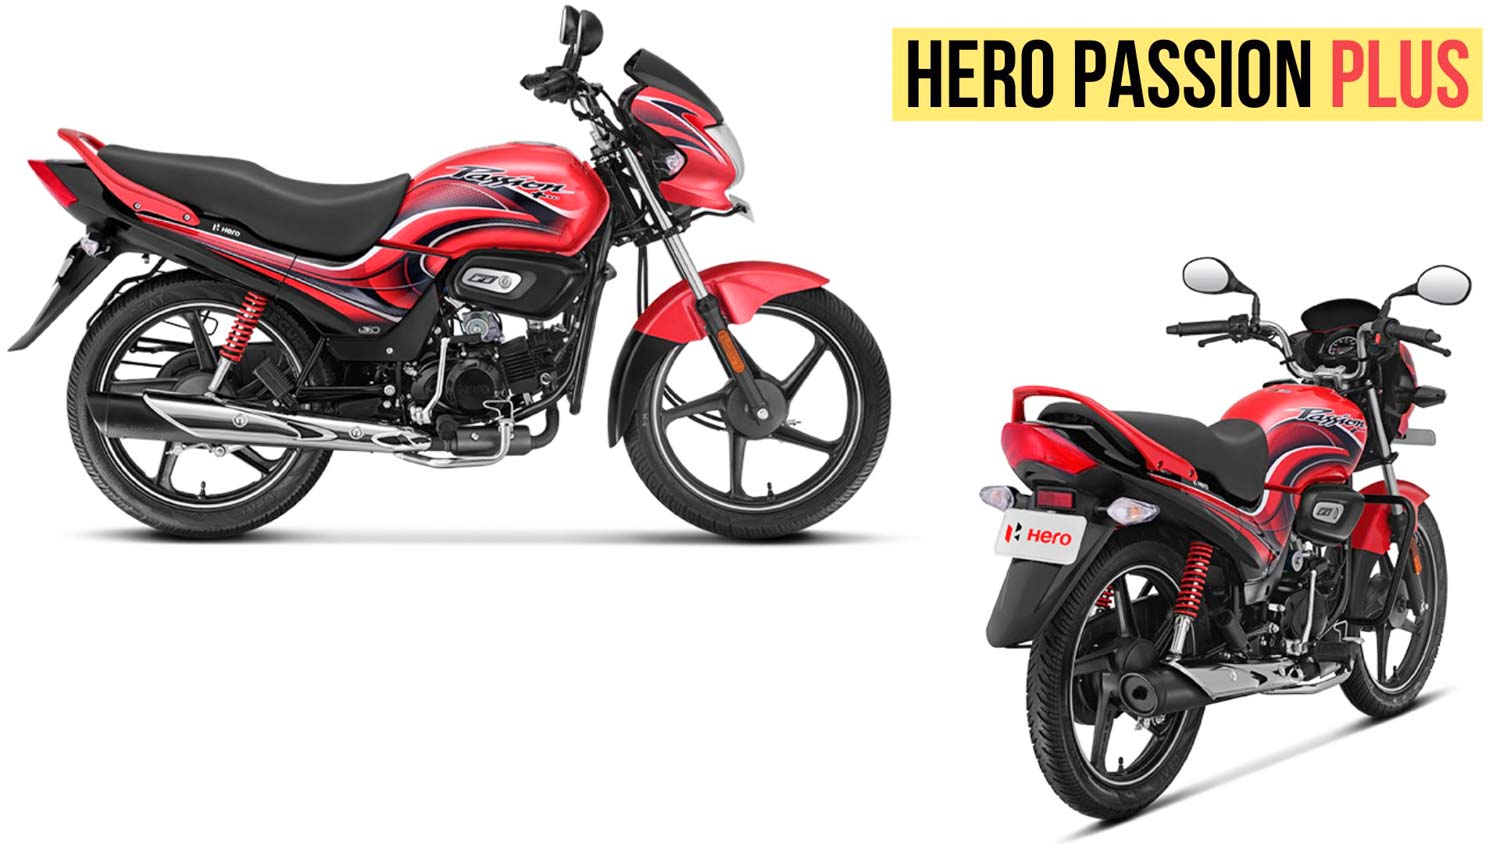 Hero Passion Plus Launched In India At Rs. 76,301